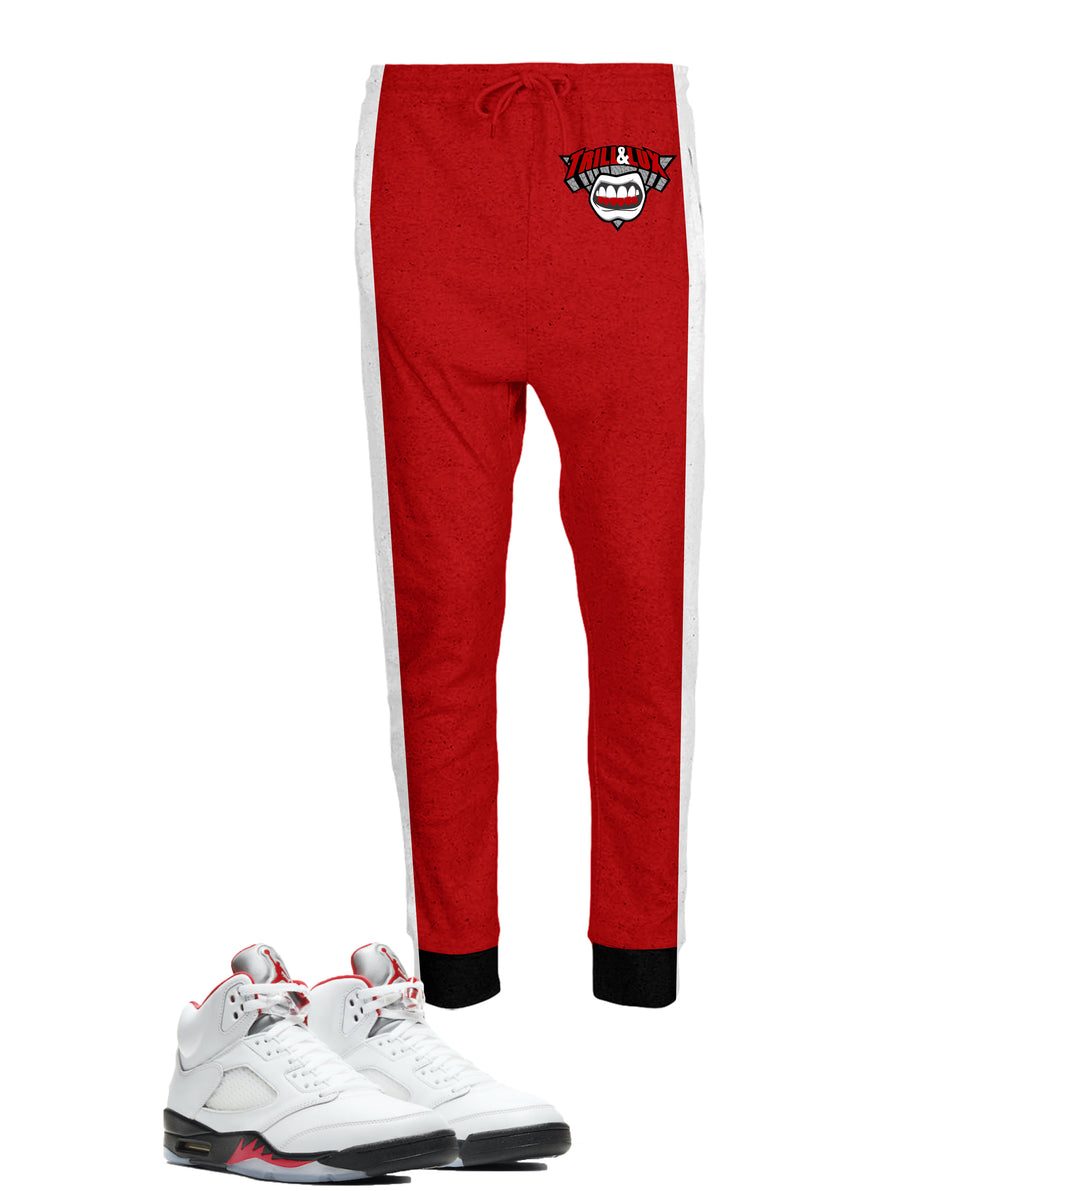 Trill & Lux | Jordan 5 Fire Red  Inspired Jogger | 69 Points